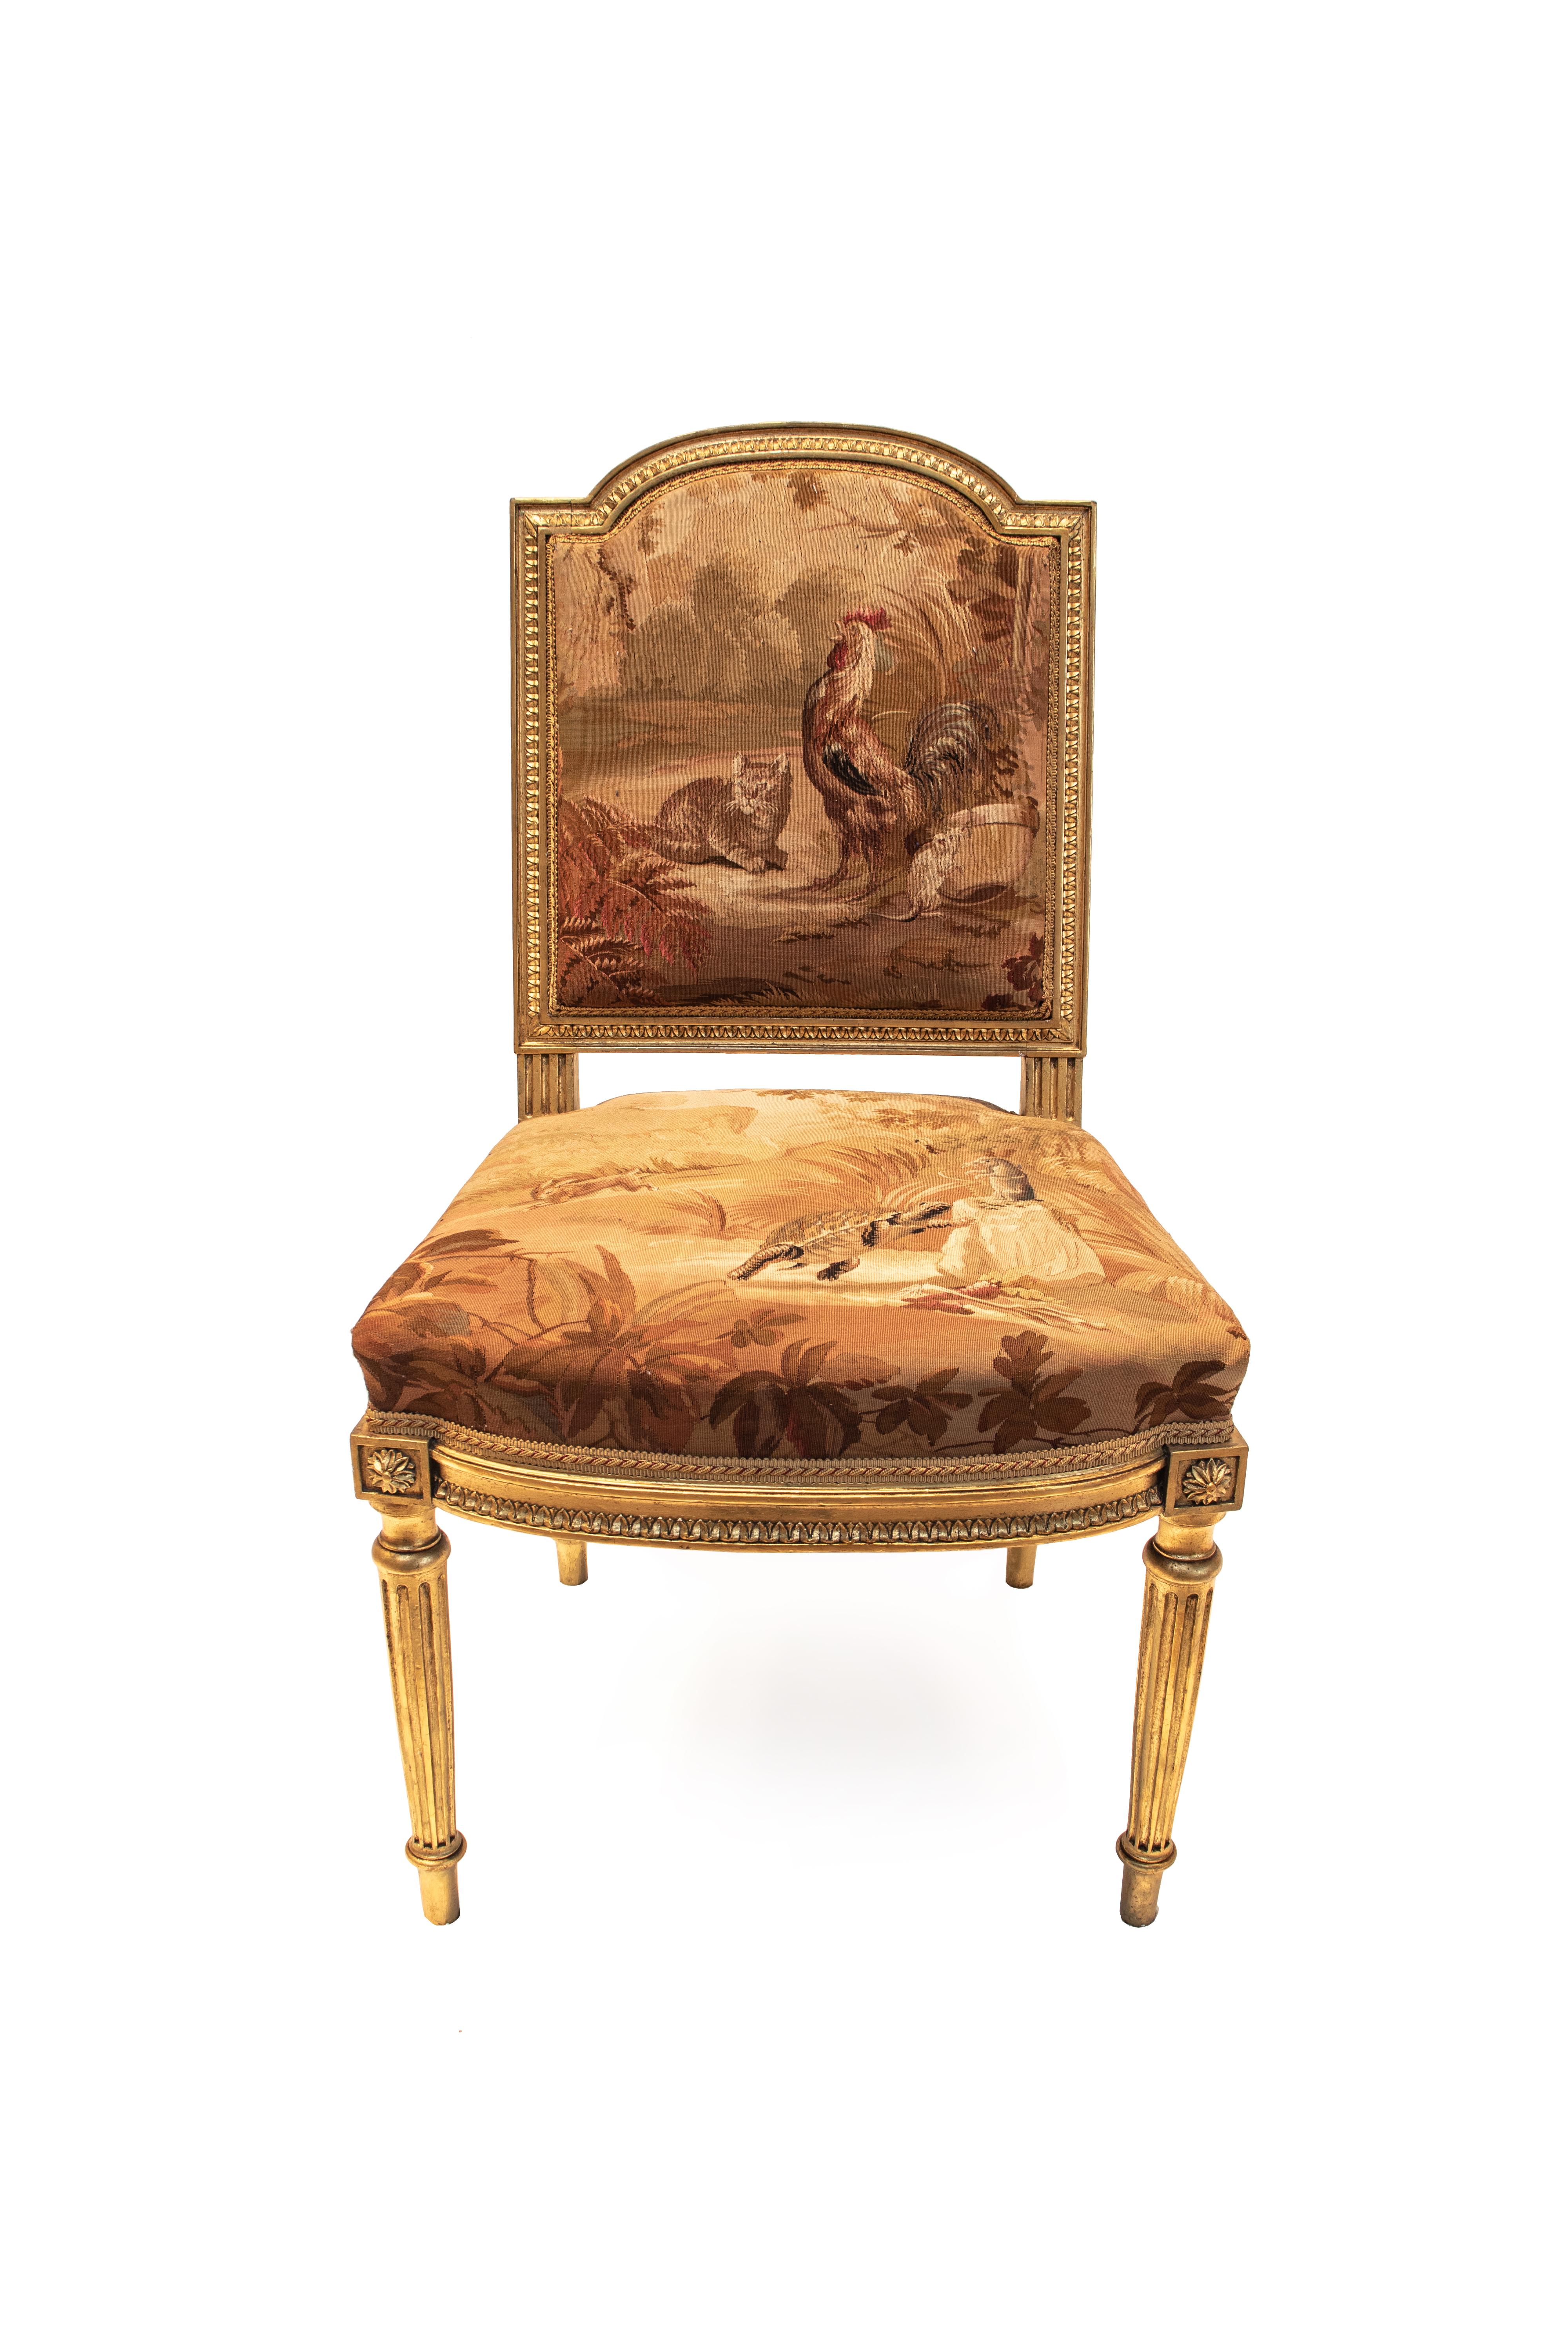 Giltwood seating set comprising of four side chairs and four armchairs. All Aubusson's needlework back and seats depict scenes from Aesop's Fables. 

There is a long tradition of manufacturing intricate and valuable tapestries in the little French